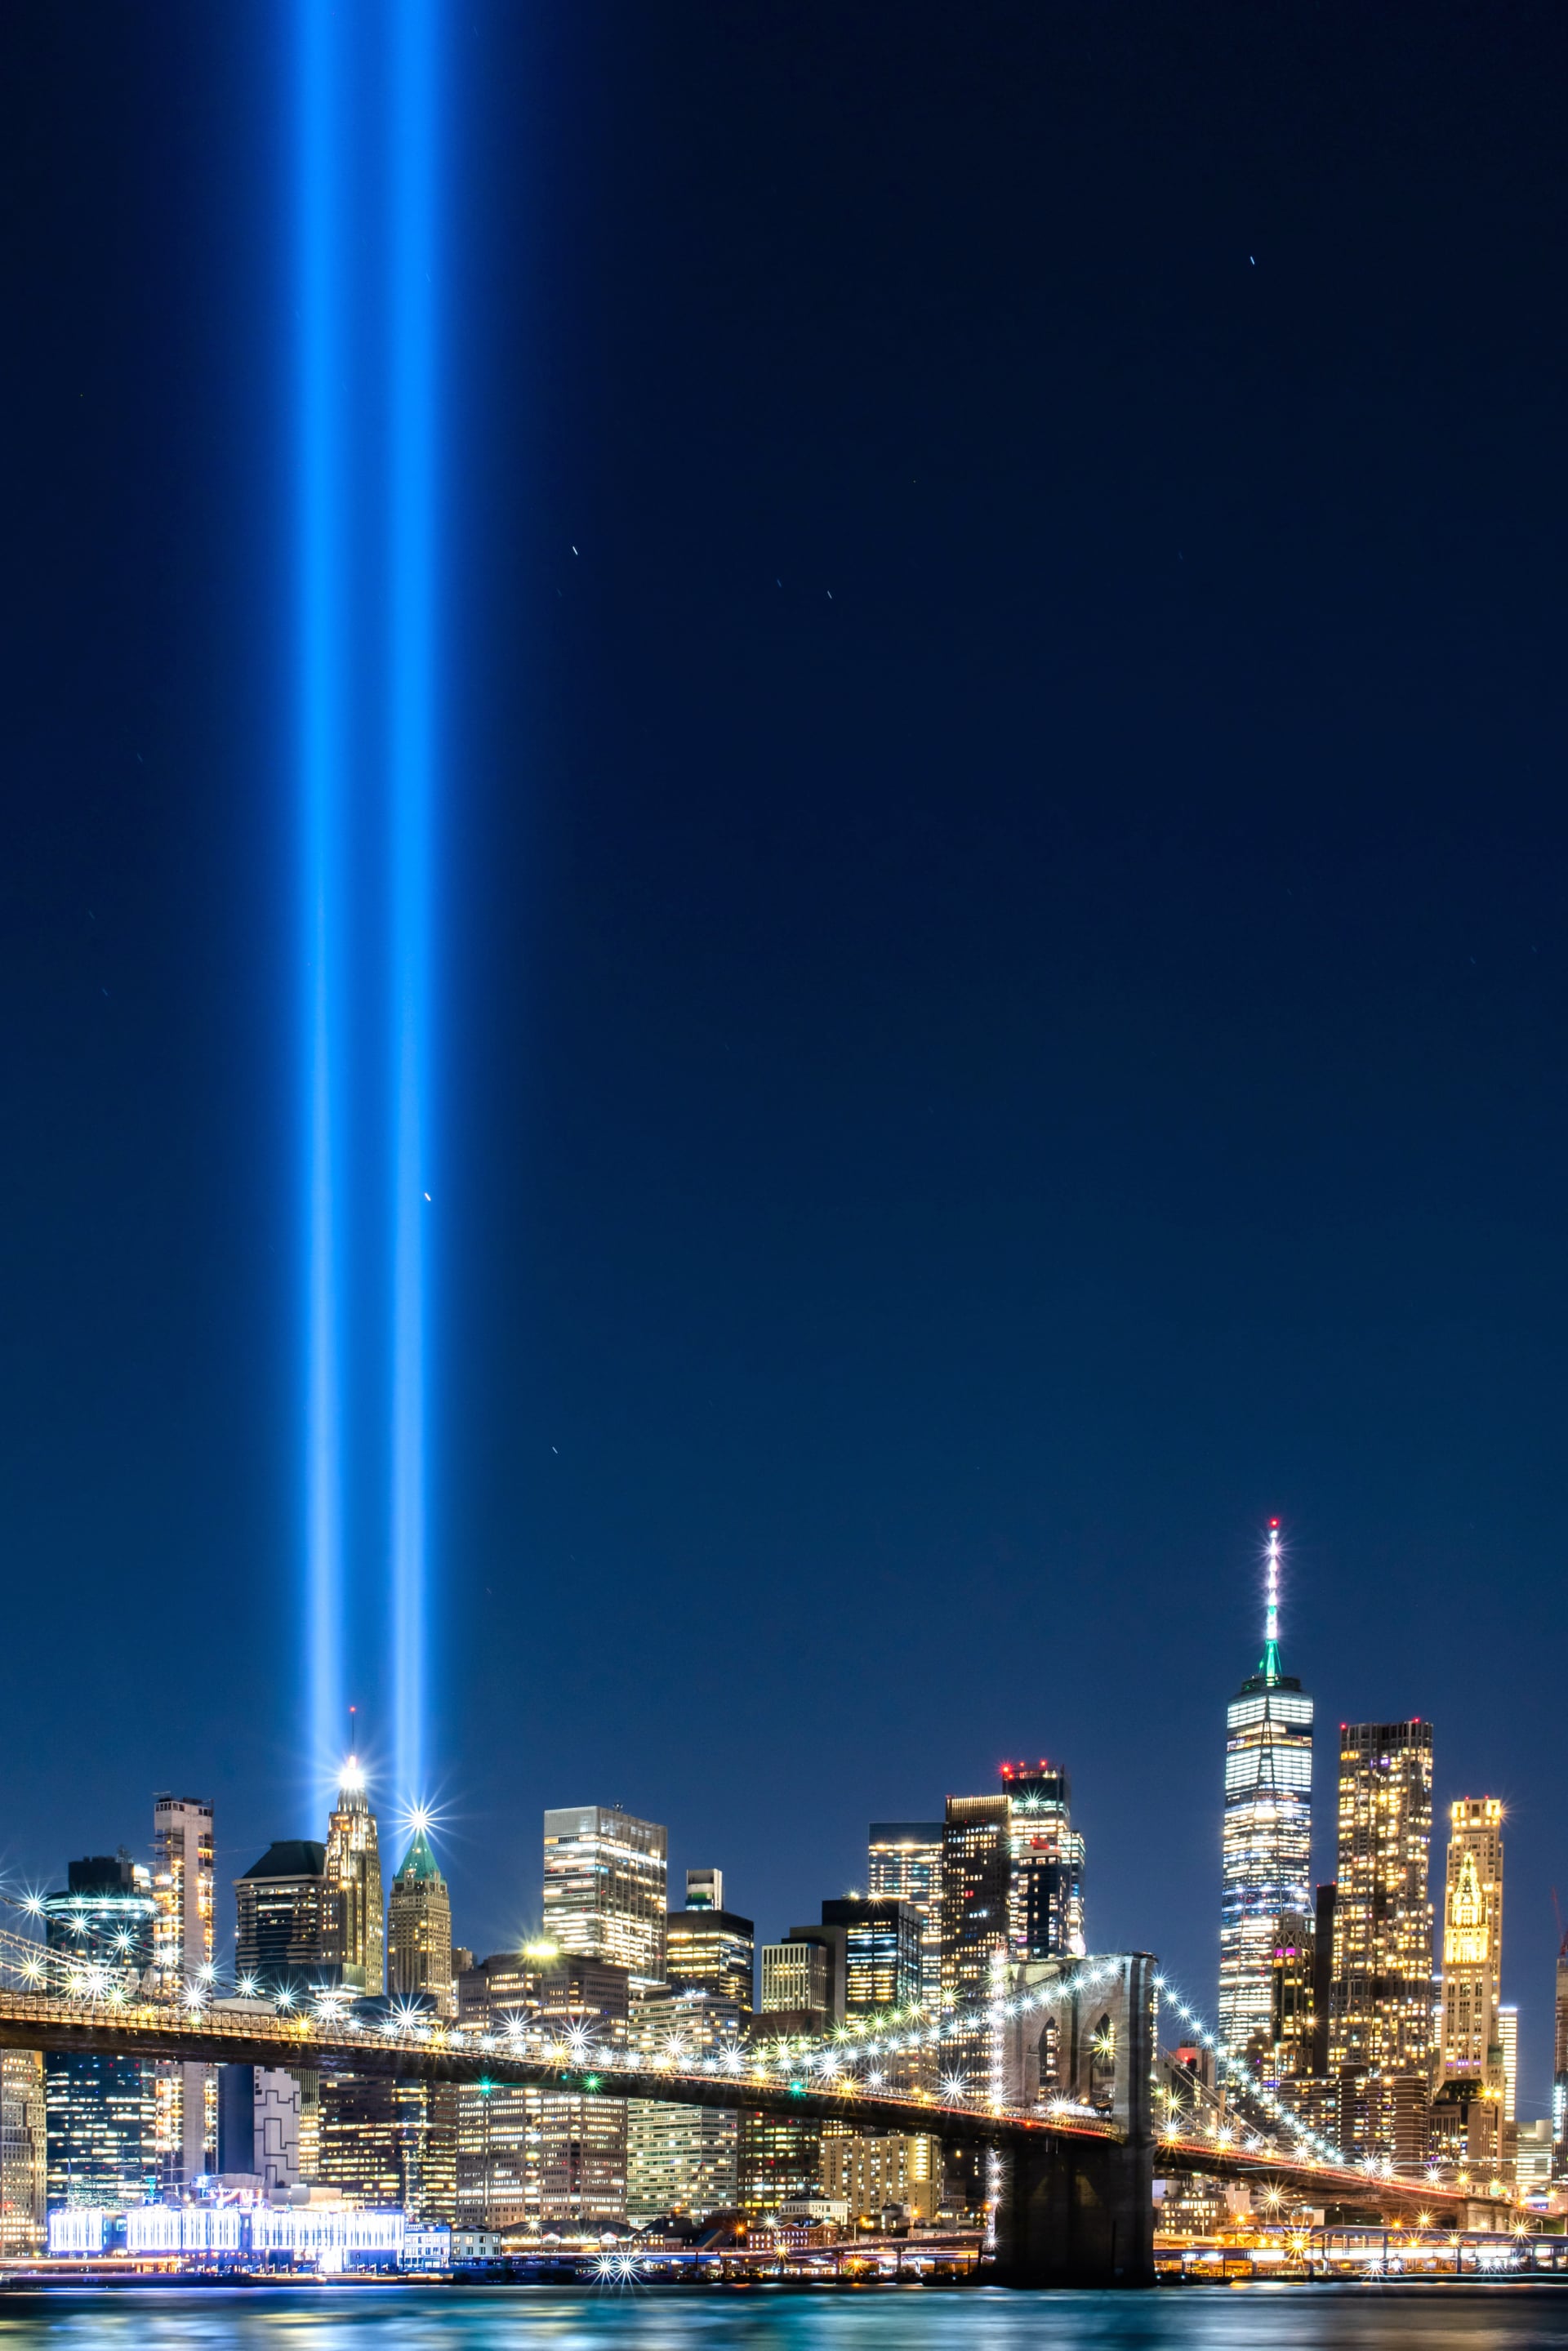 911 Memorial wallpapers HD quality